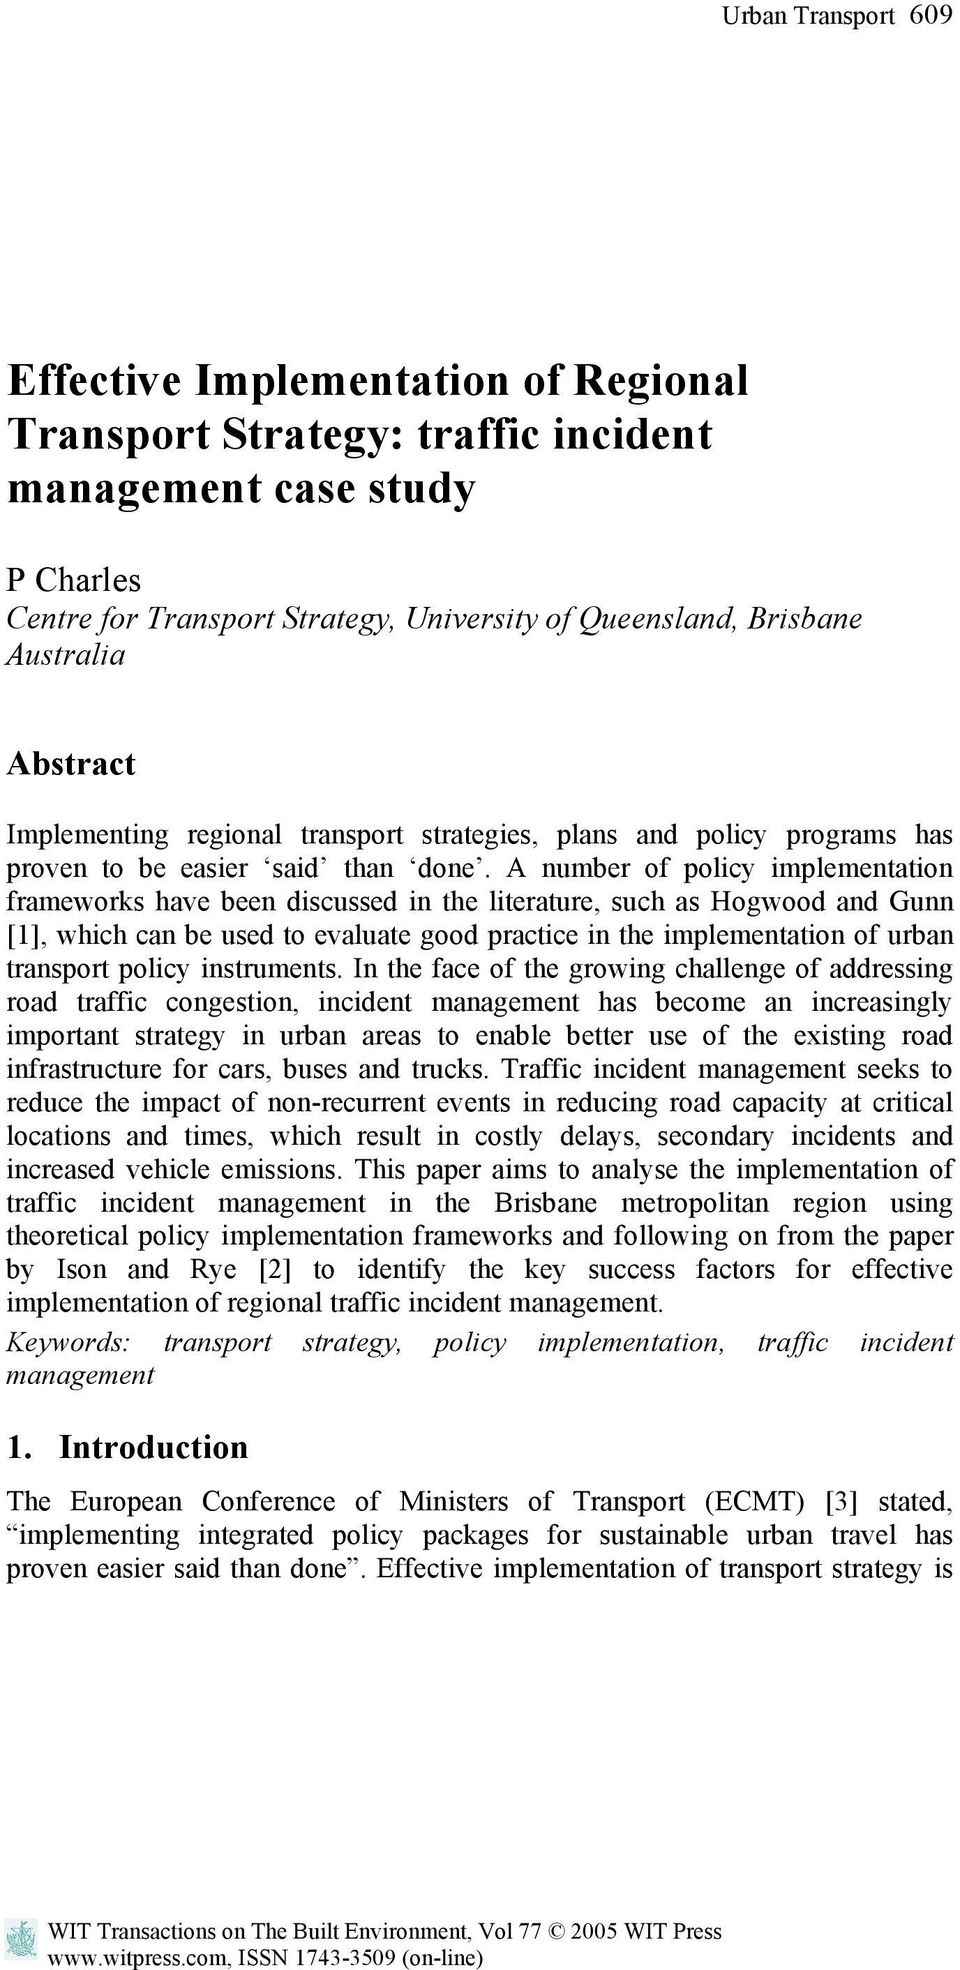 A number of policy implementation frameworks have been discussed in the literature, such as Hogwood and Gunn [1], which can be used to evaluate good practice in the implementation of urban transport